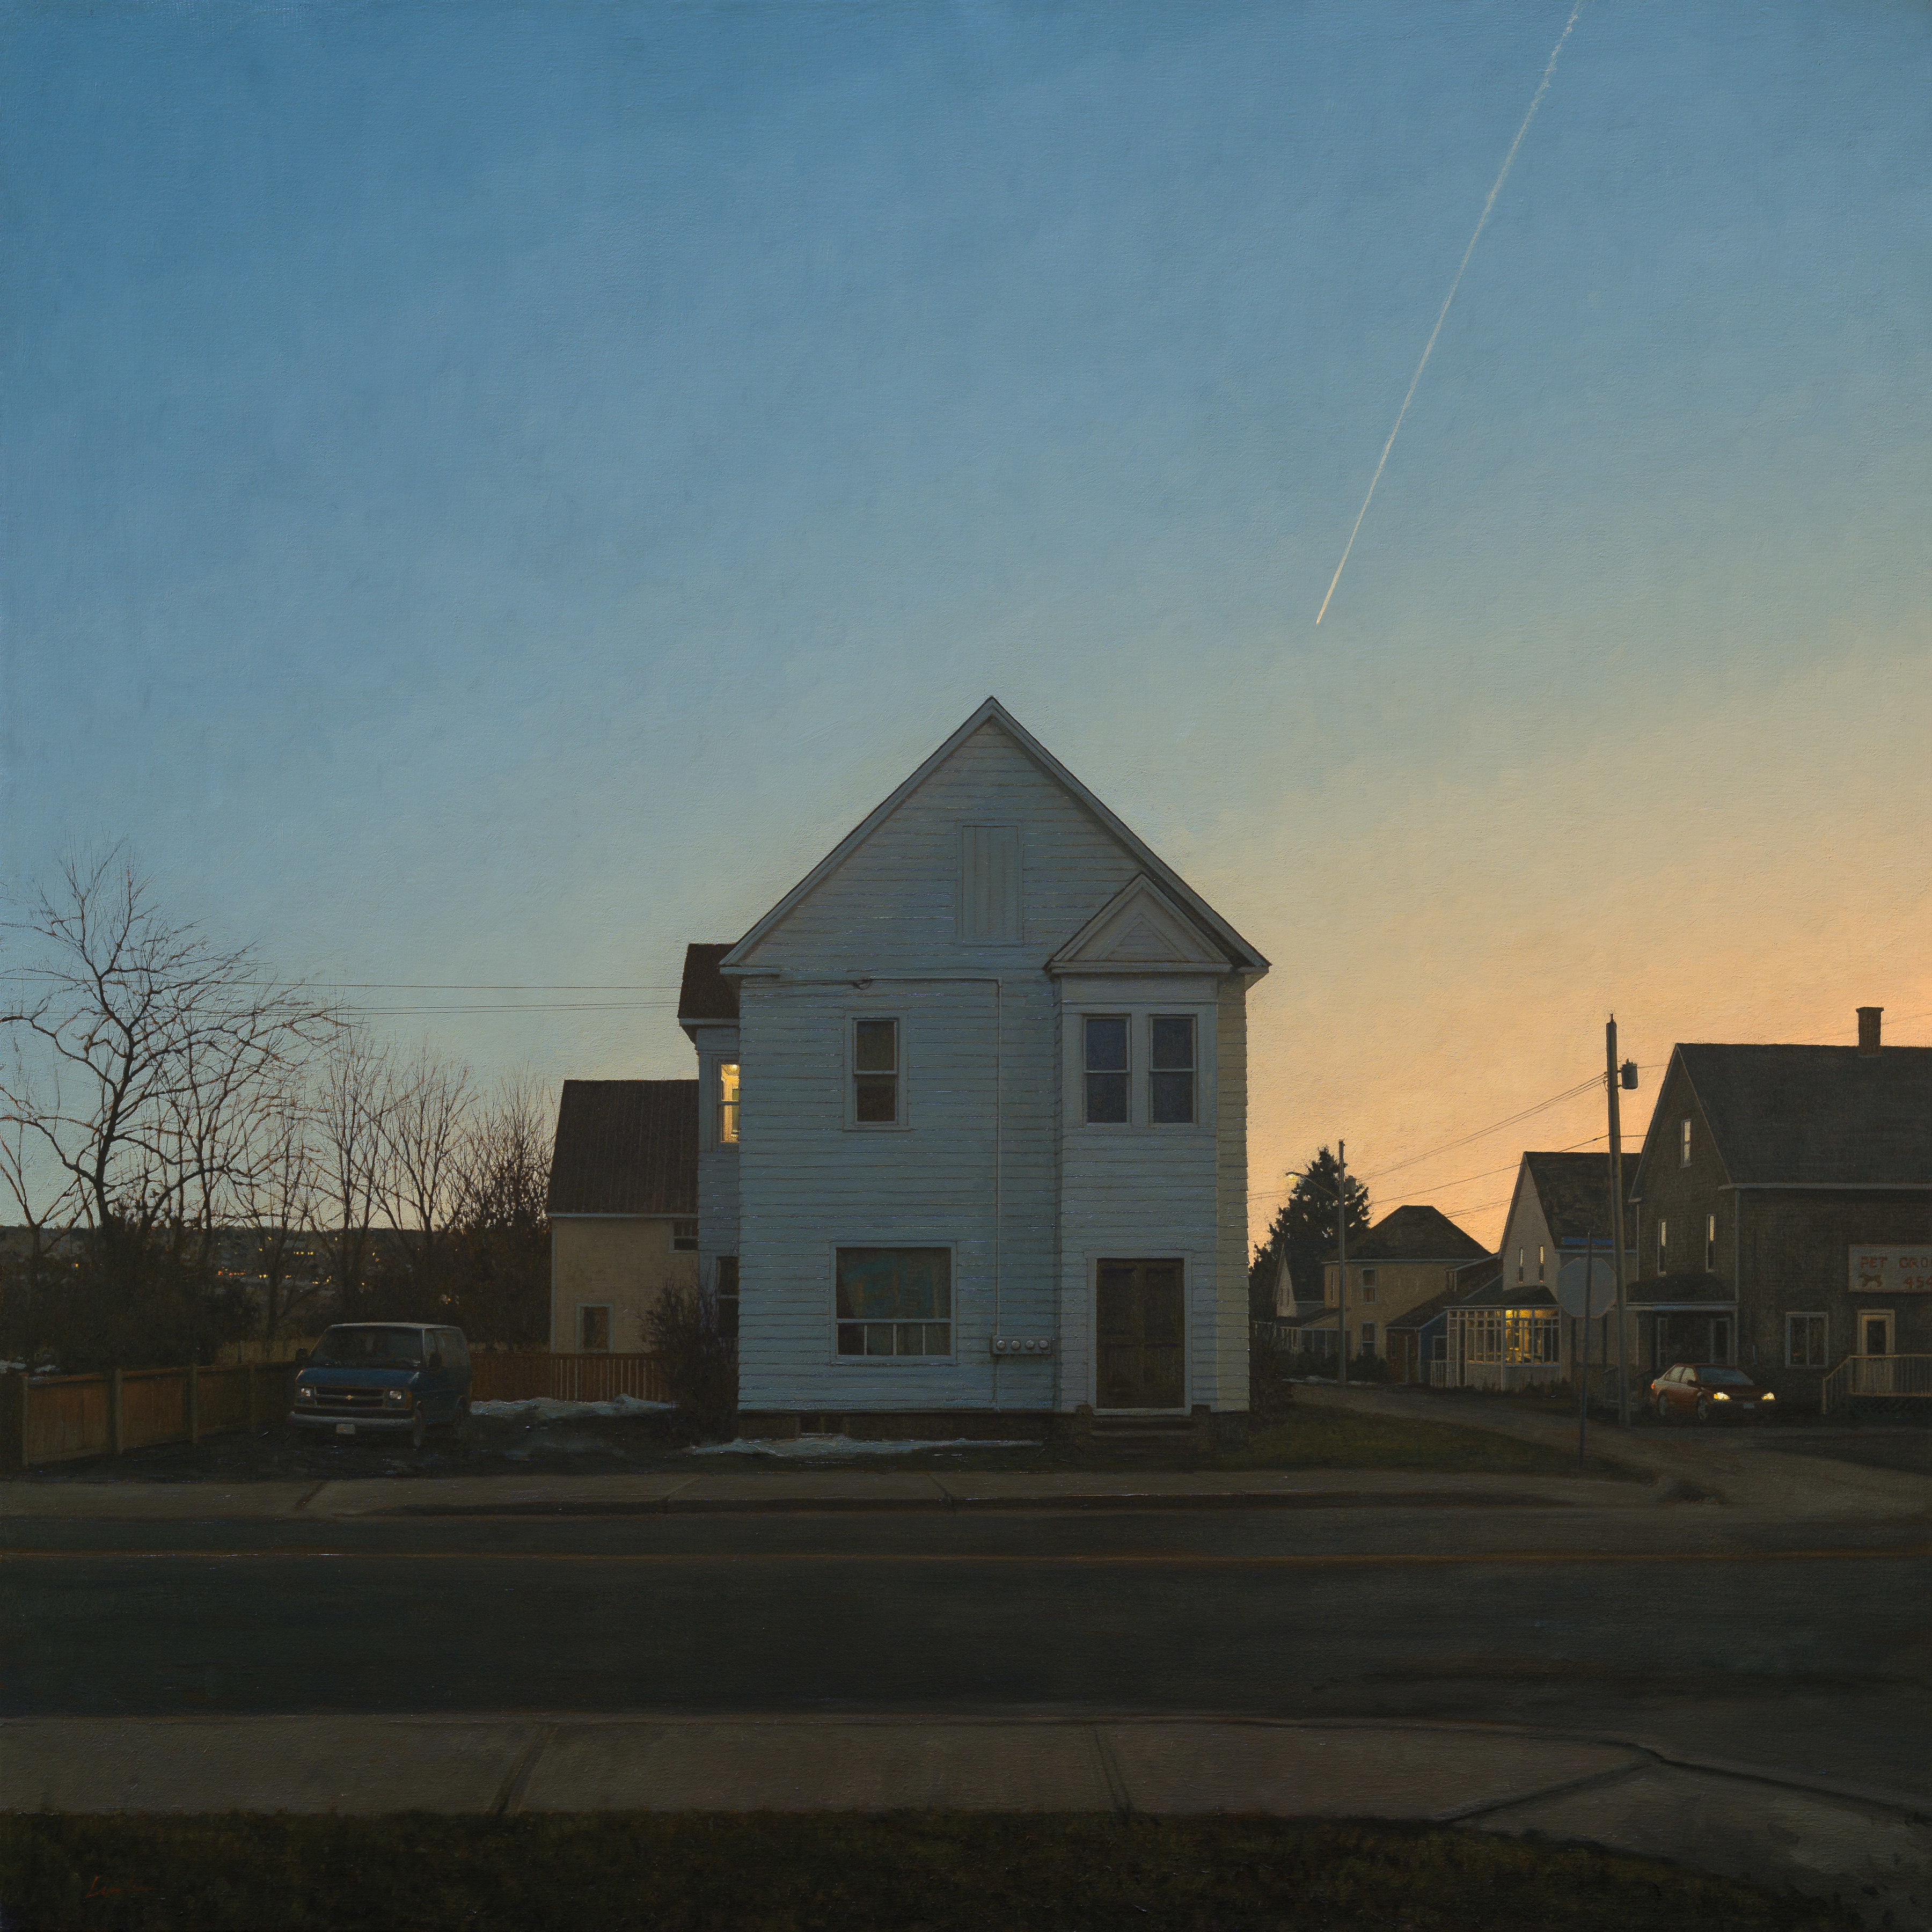 linden frederick, Tenant (SOLD), 2013, oil on linen, 55 x 55 inches